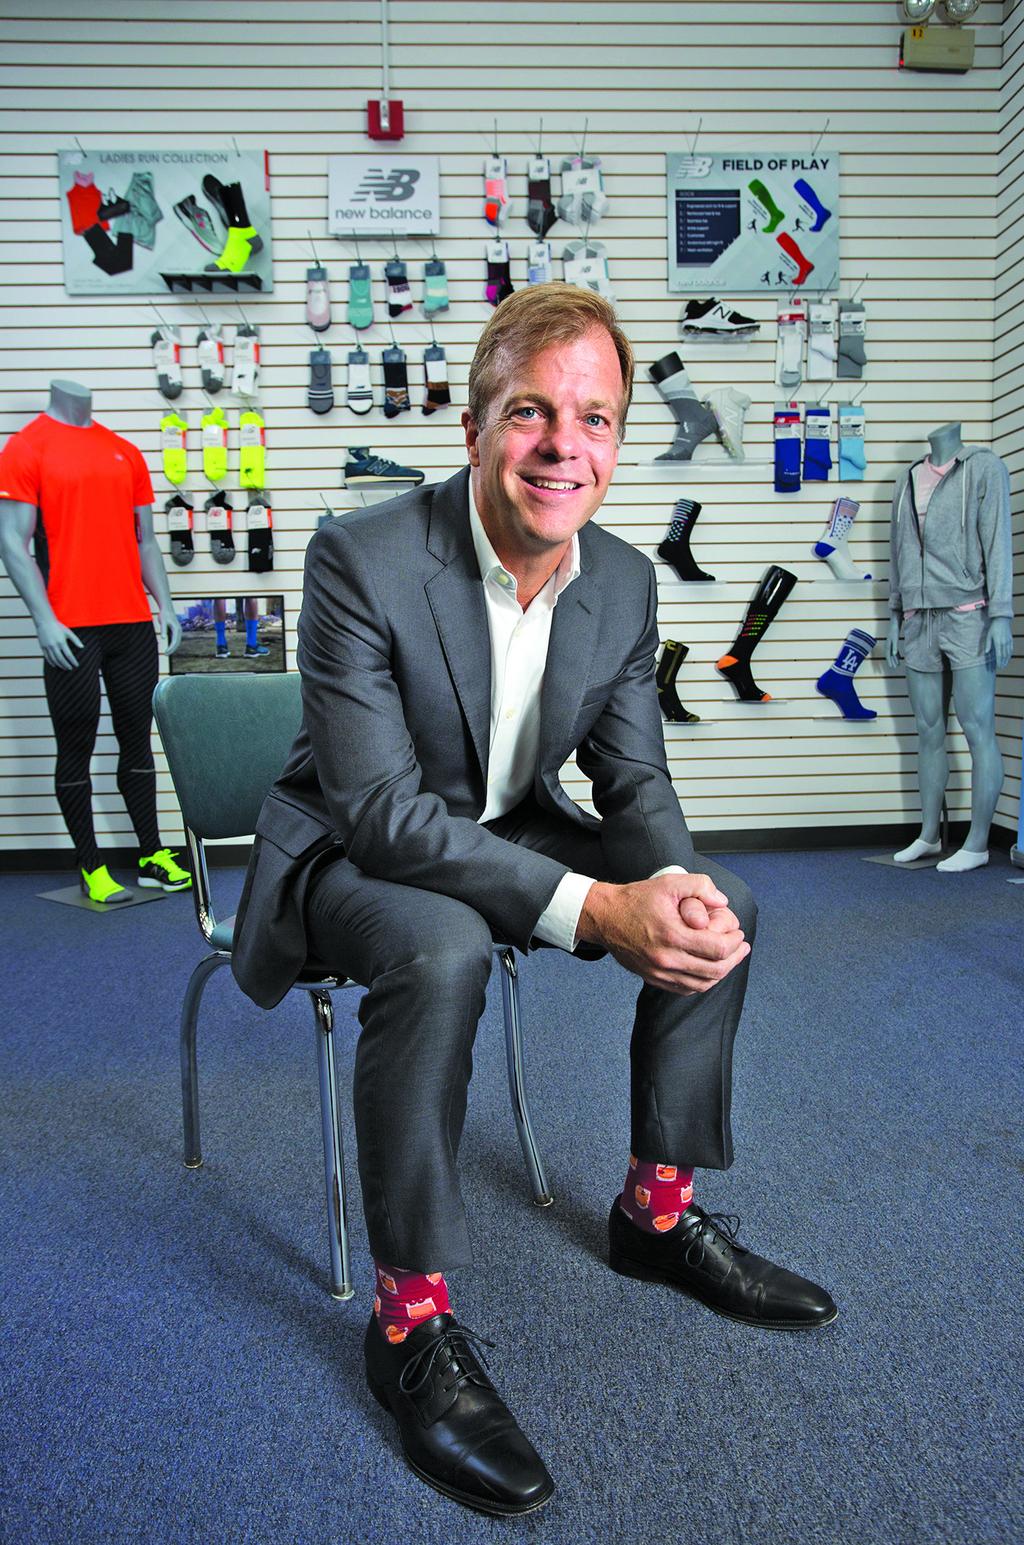 Mount Airy's Renfro targets the movement for fashion footwear - Triad  Business Journal